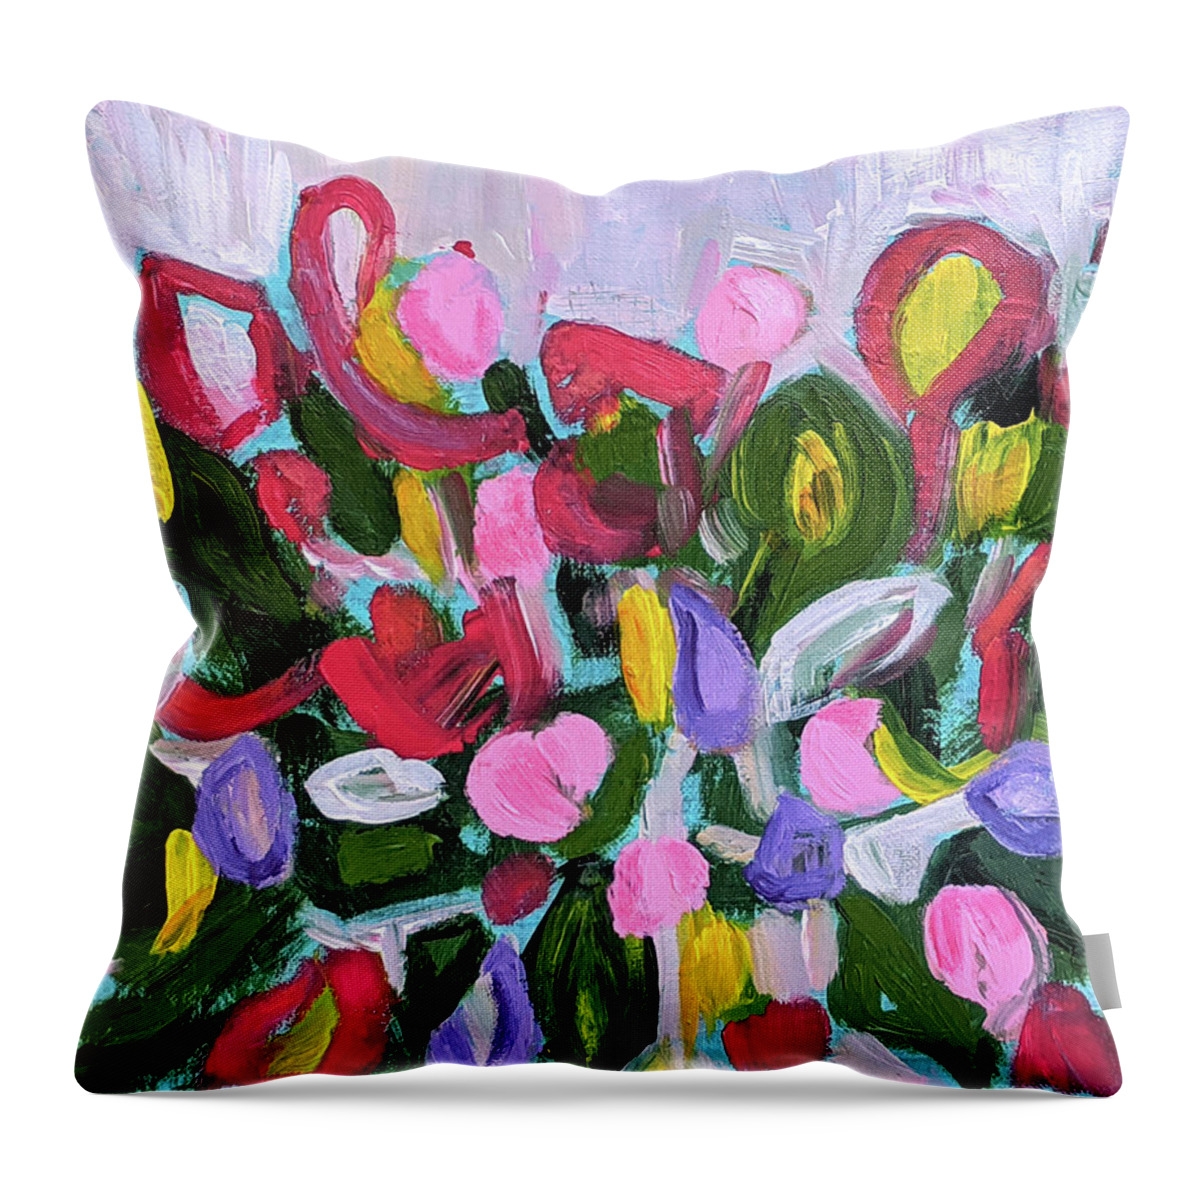 Floral Abstract Throw Pillow featuring the painting Basket of Love by Haleh Mahbod